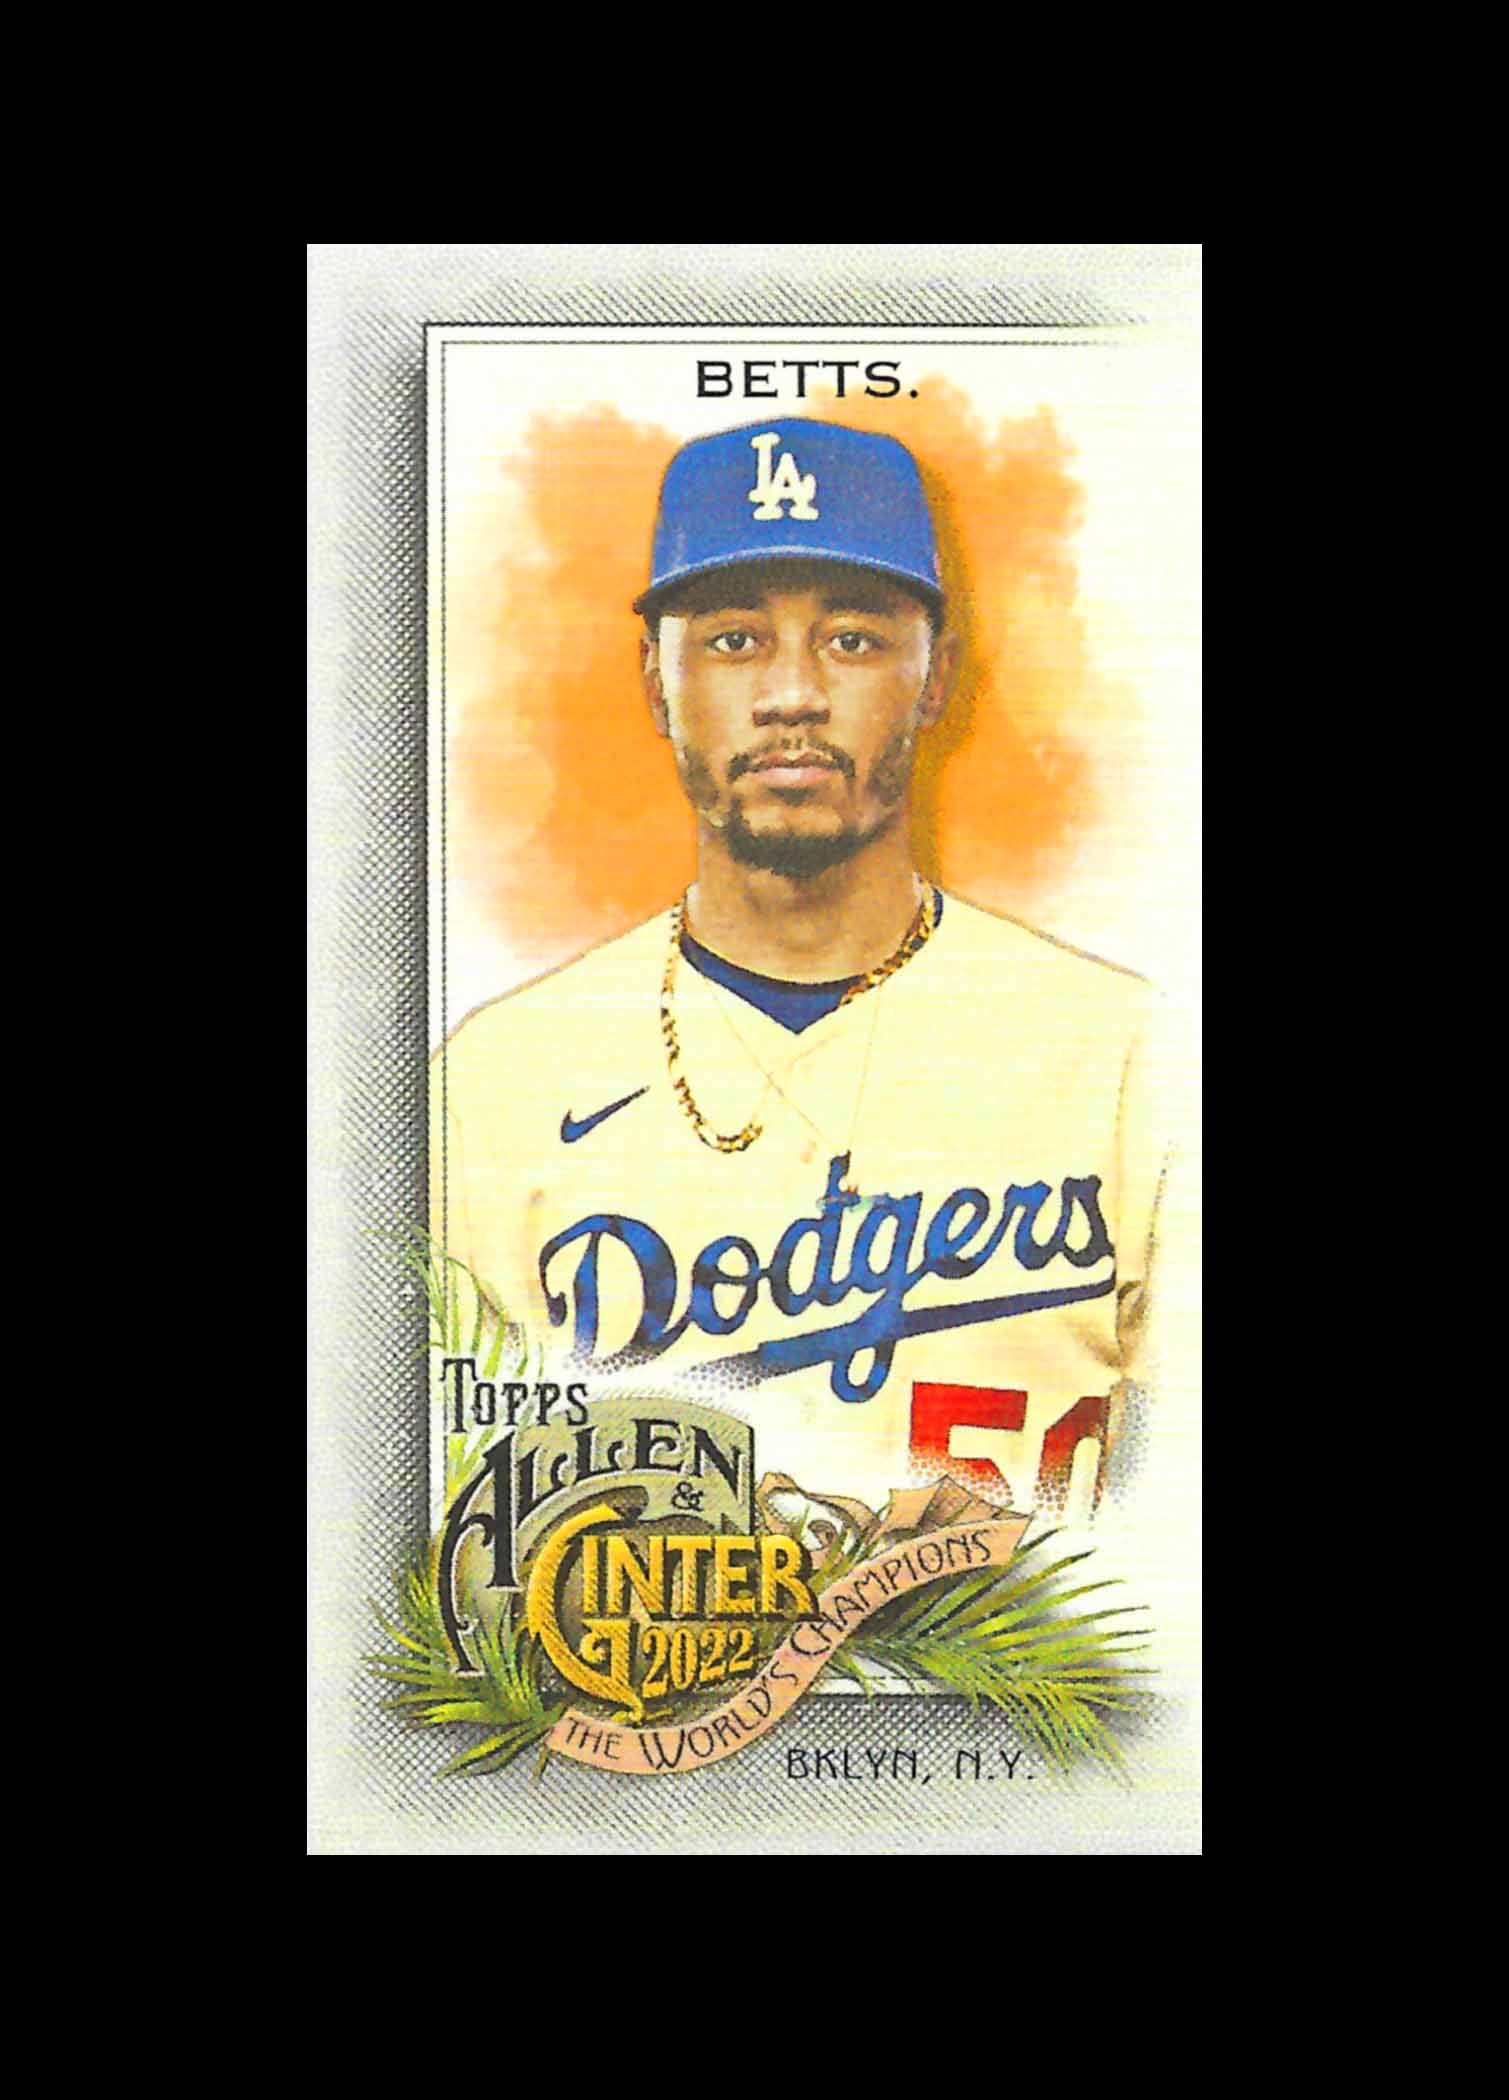 2022 Topps Allen and Ginter Mini